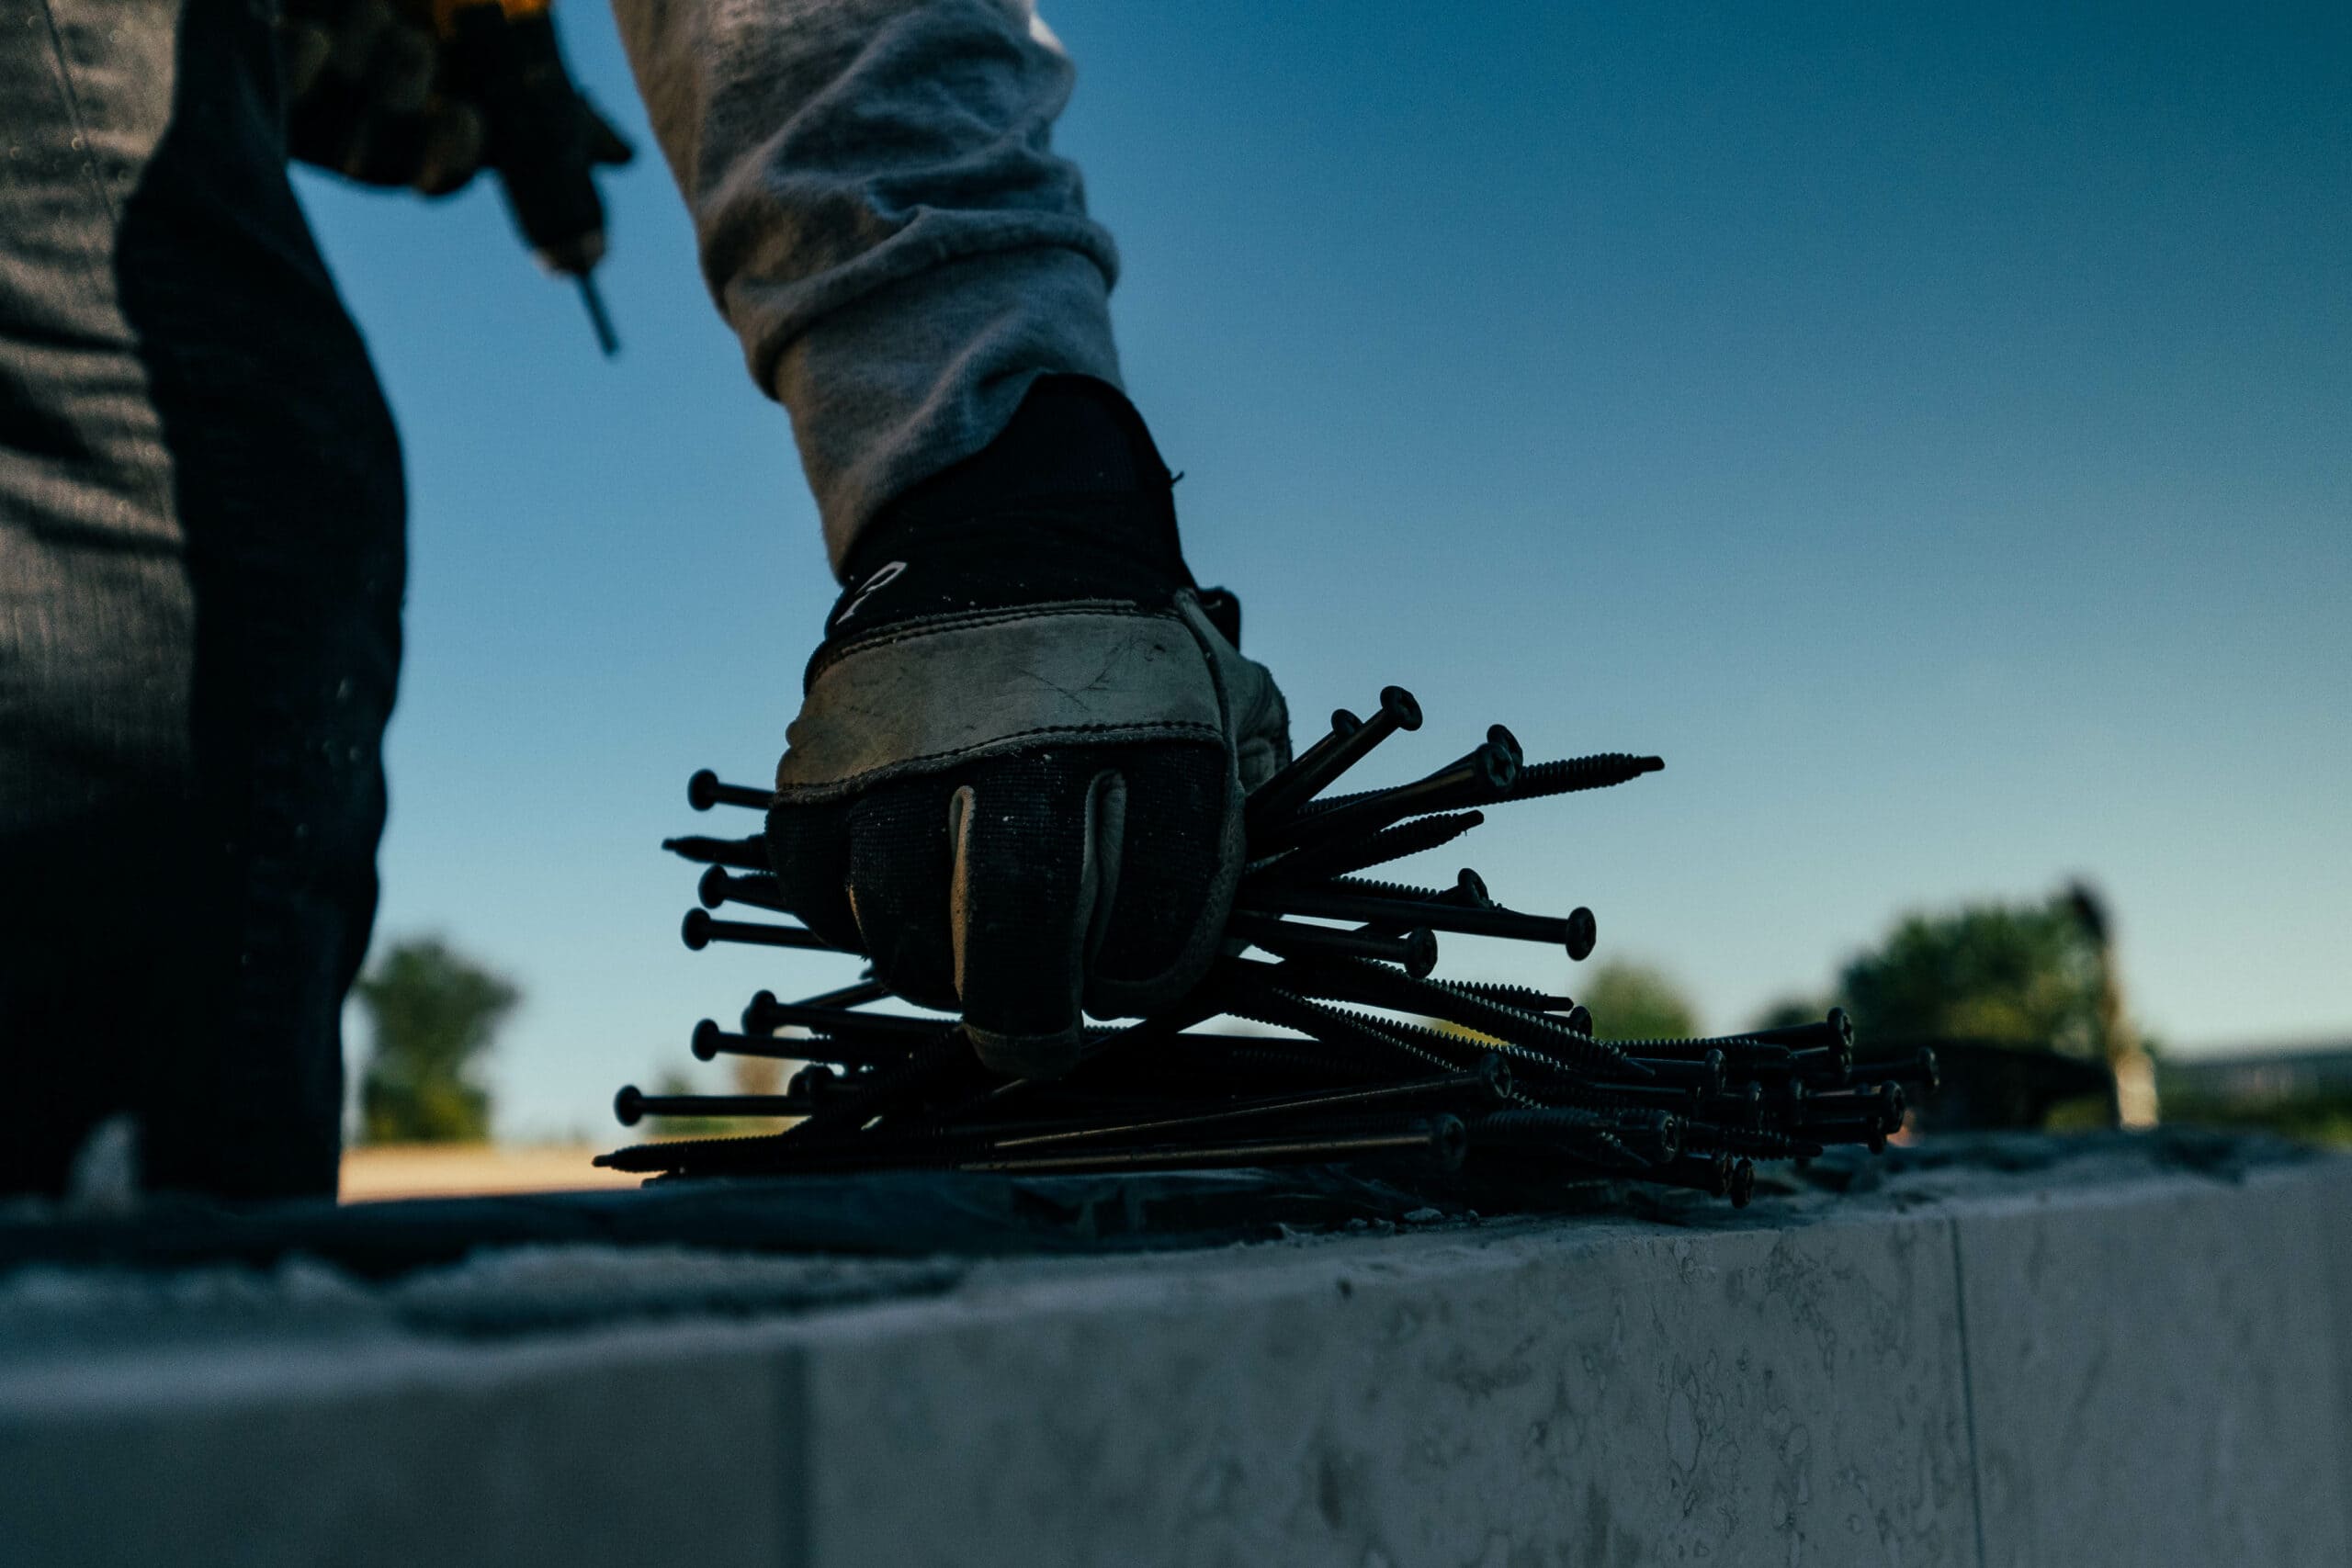 A roofing contractor from North Phoenix is holding nails on a concrete wall.